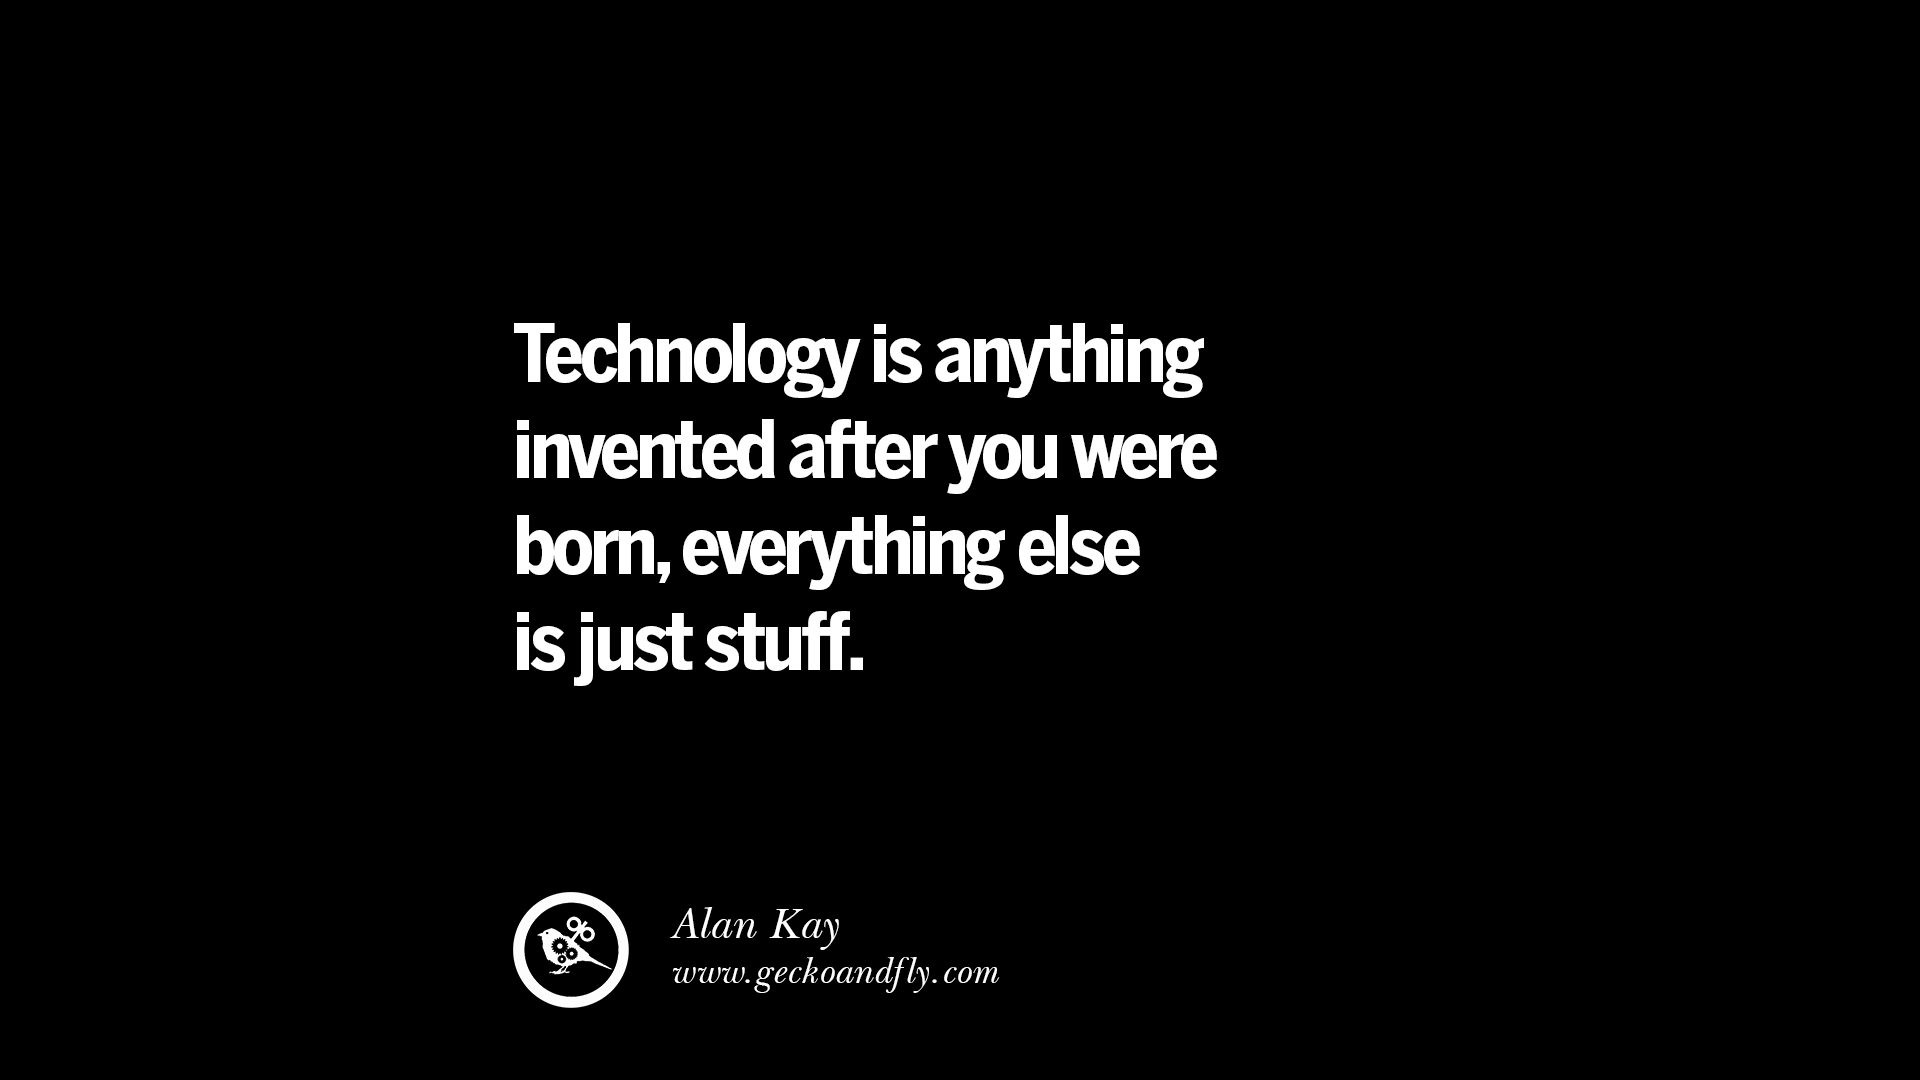 Technology And Education Quotes
 21 Famous Quotes on Education School and Knowledge